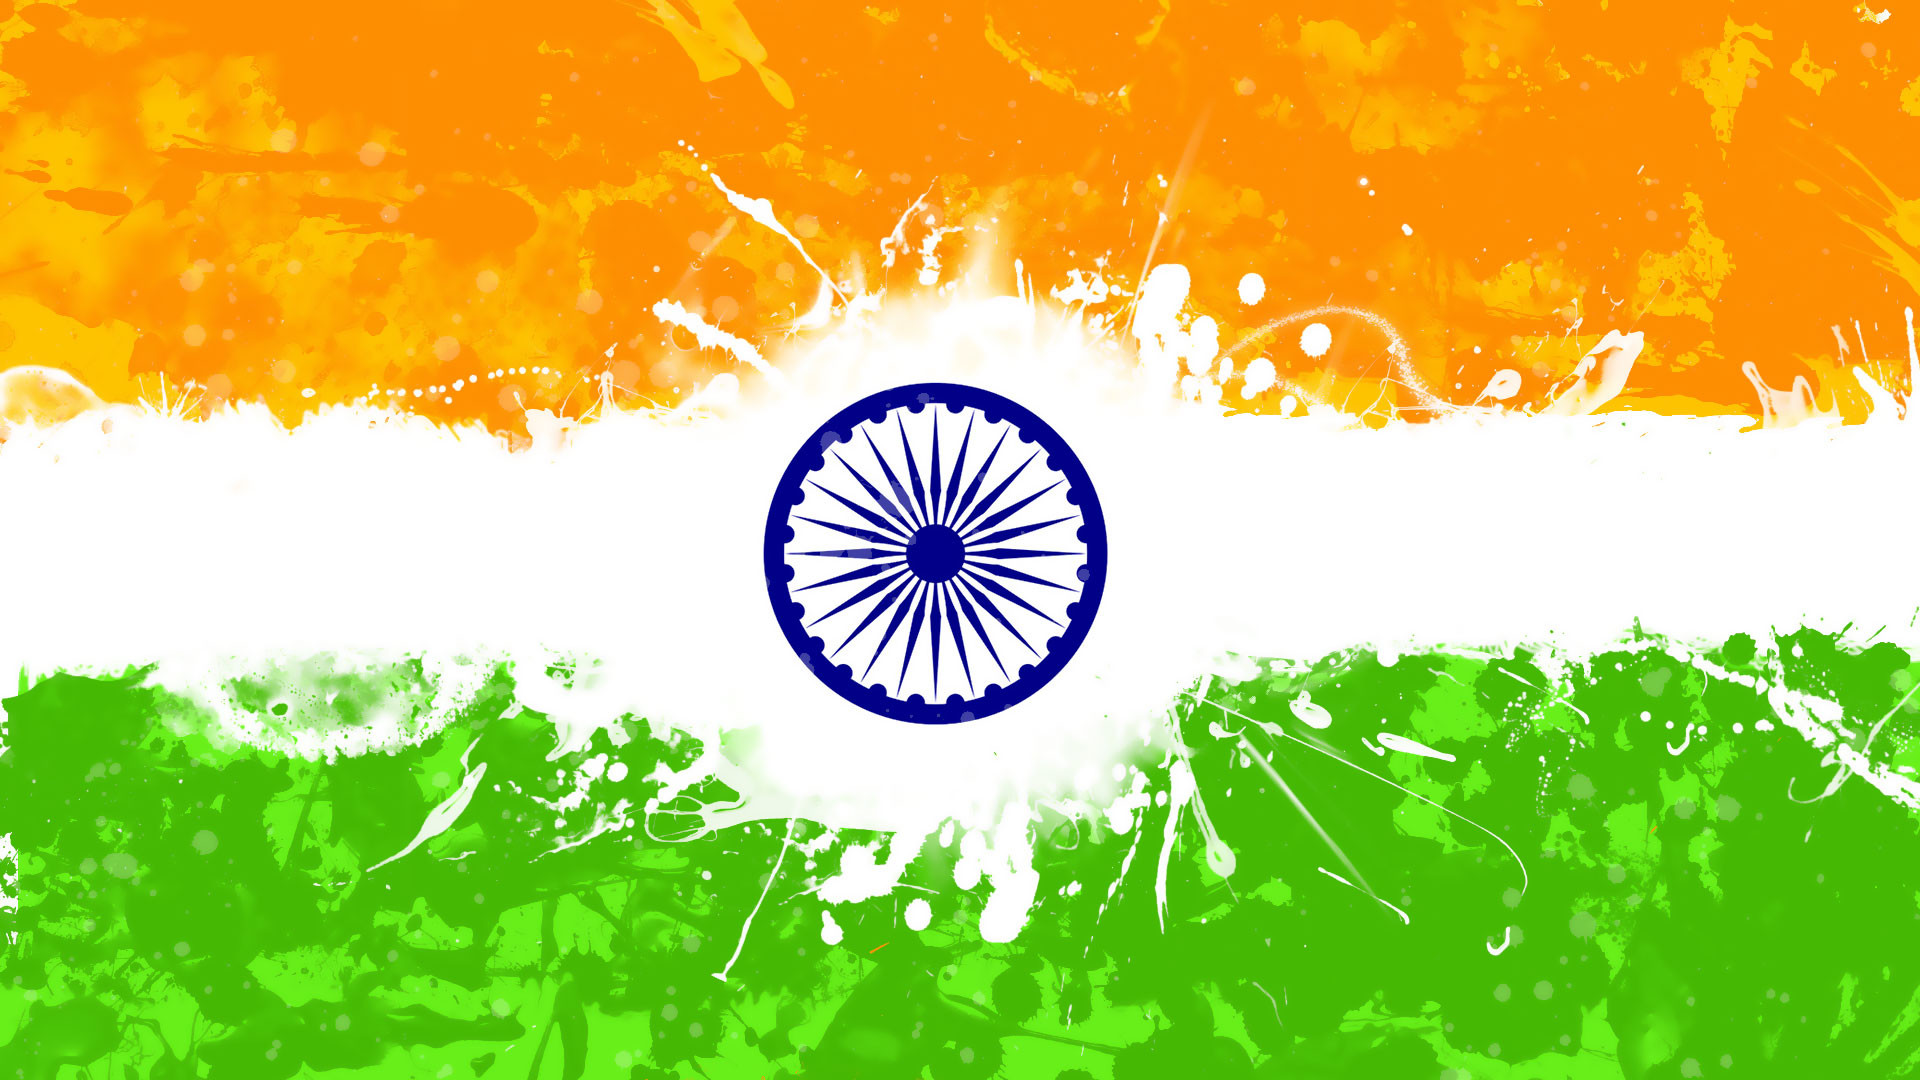 Download Free 15th August/ Independence Day Flags Banner - Indian Flag Background Hd - HD Wallpaper 